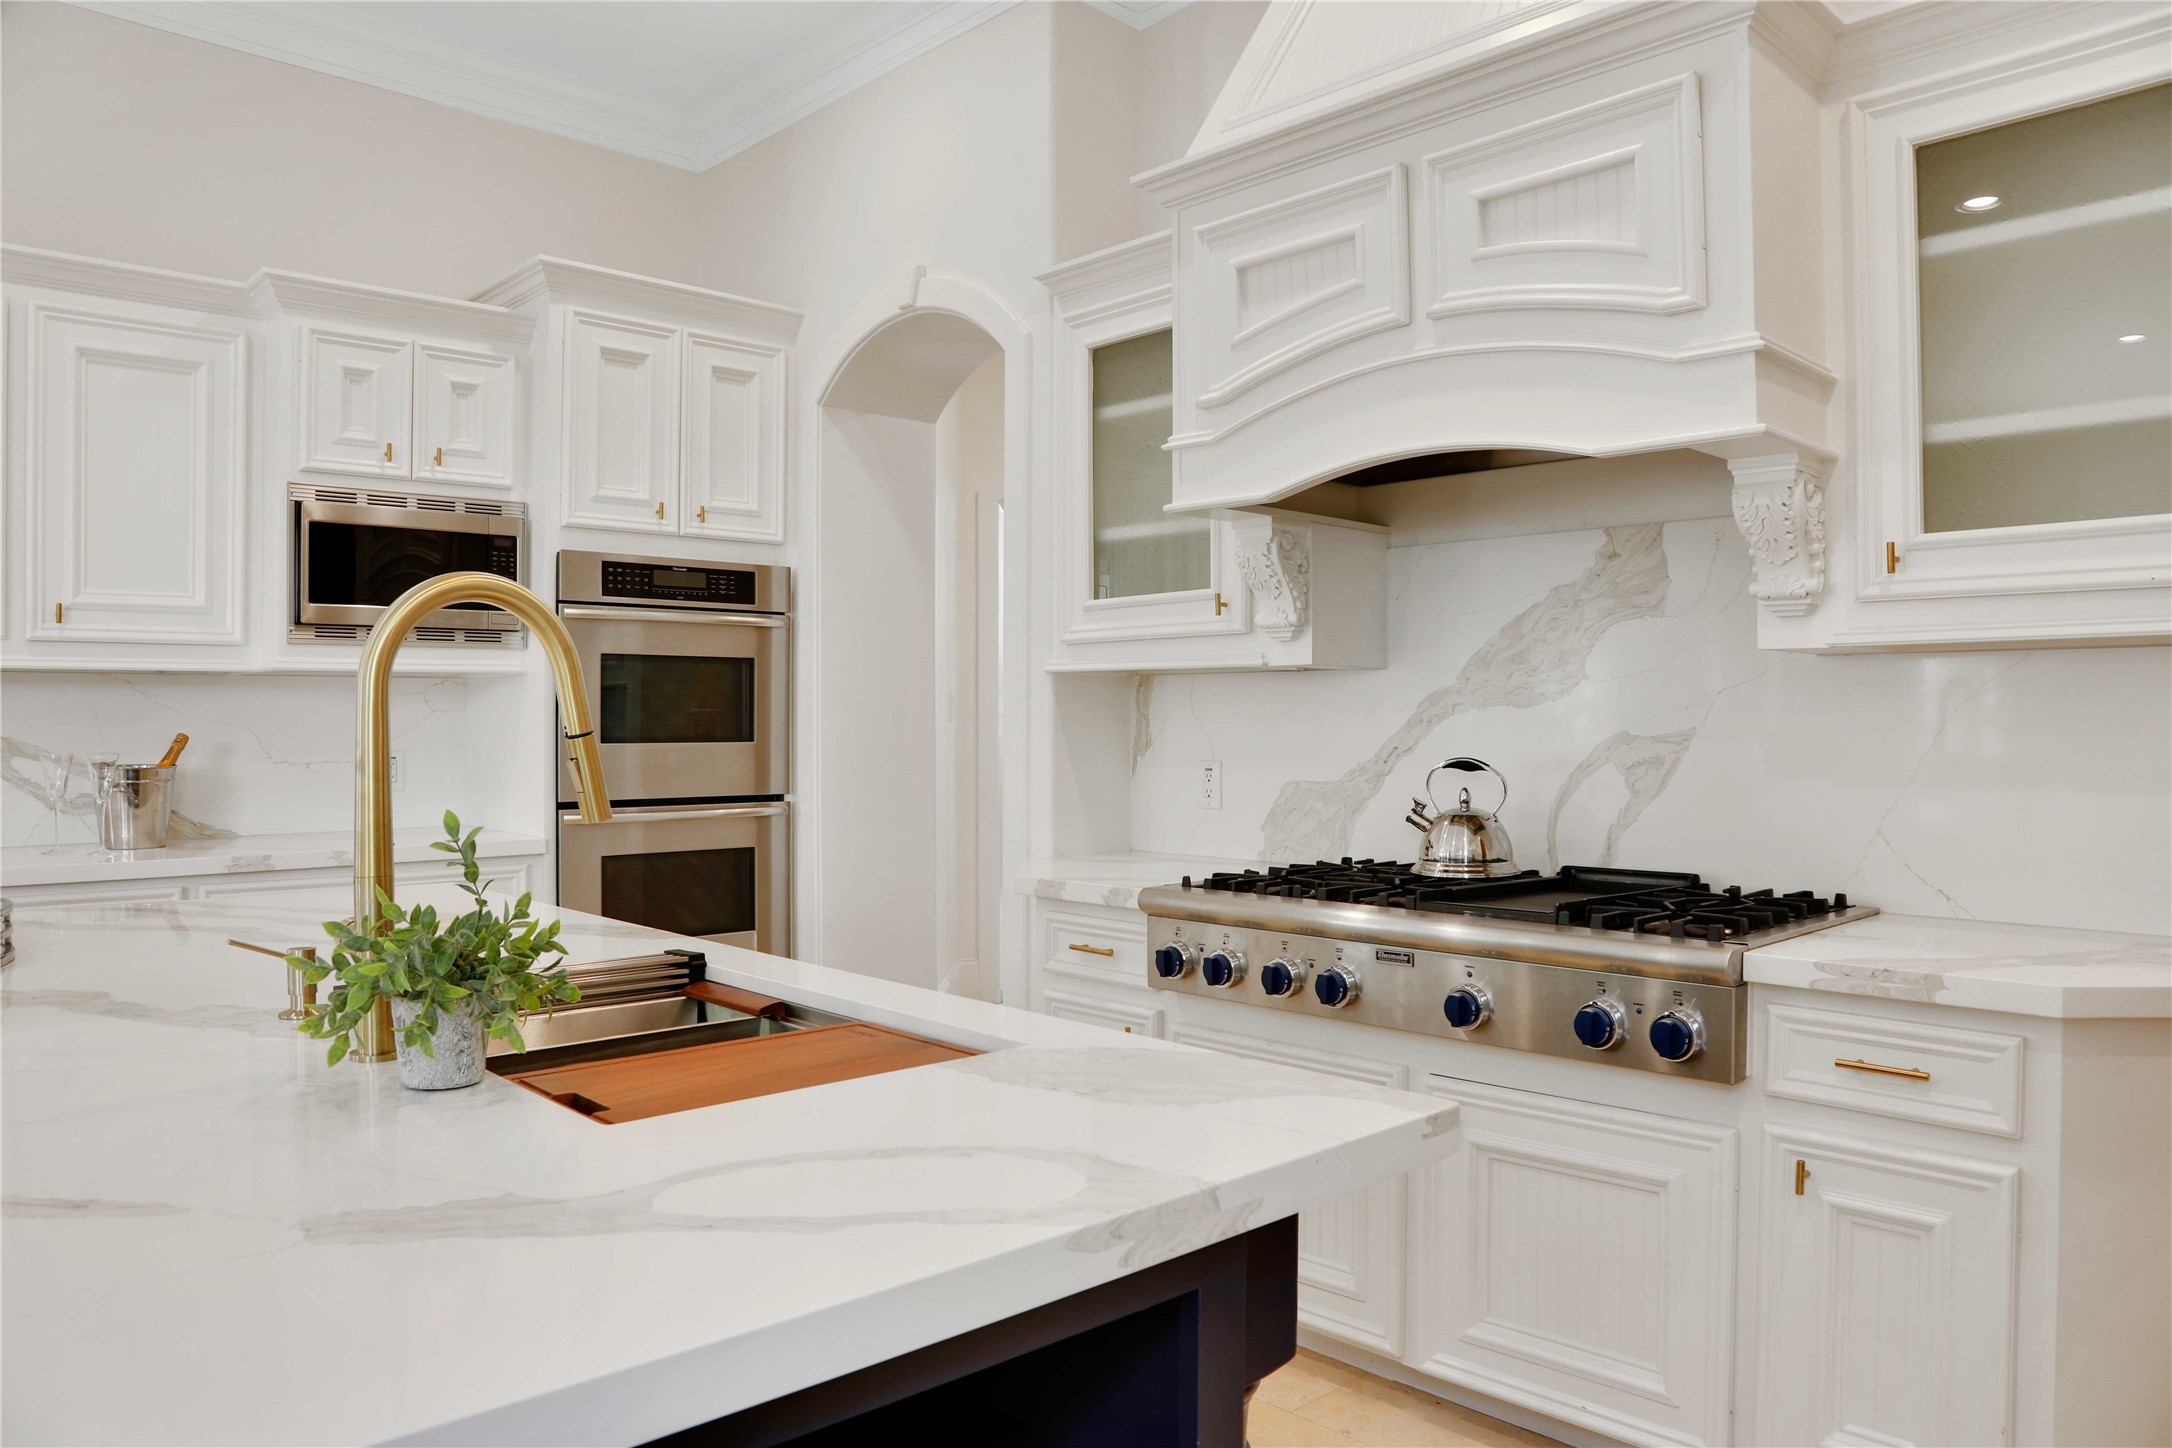 The updated kitchen is a chef's dream featureing a stunning Quartz Island and custom cabinetry, exuding both style and functionality.
